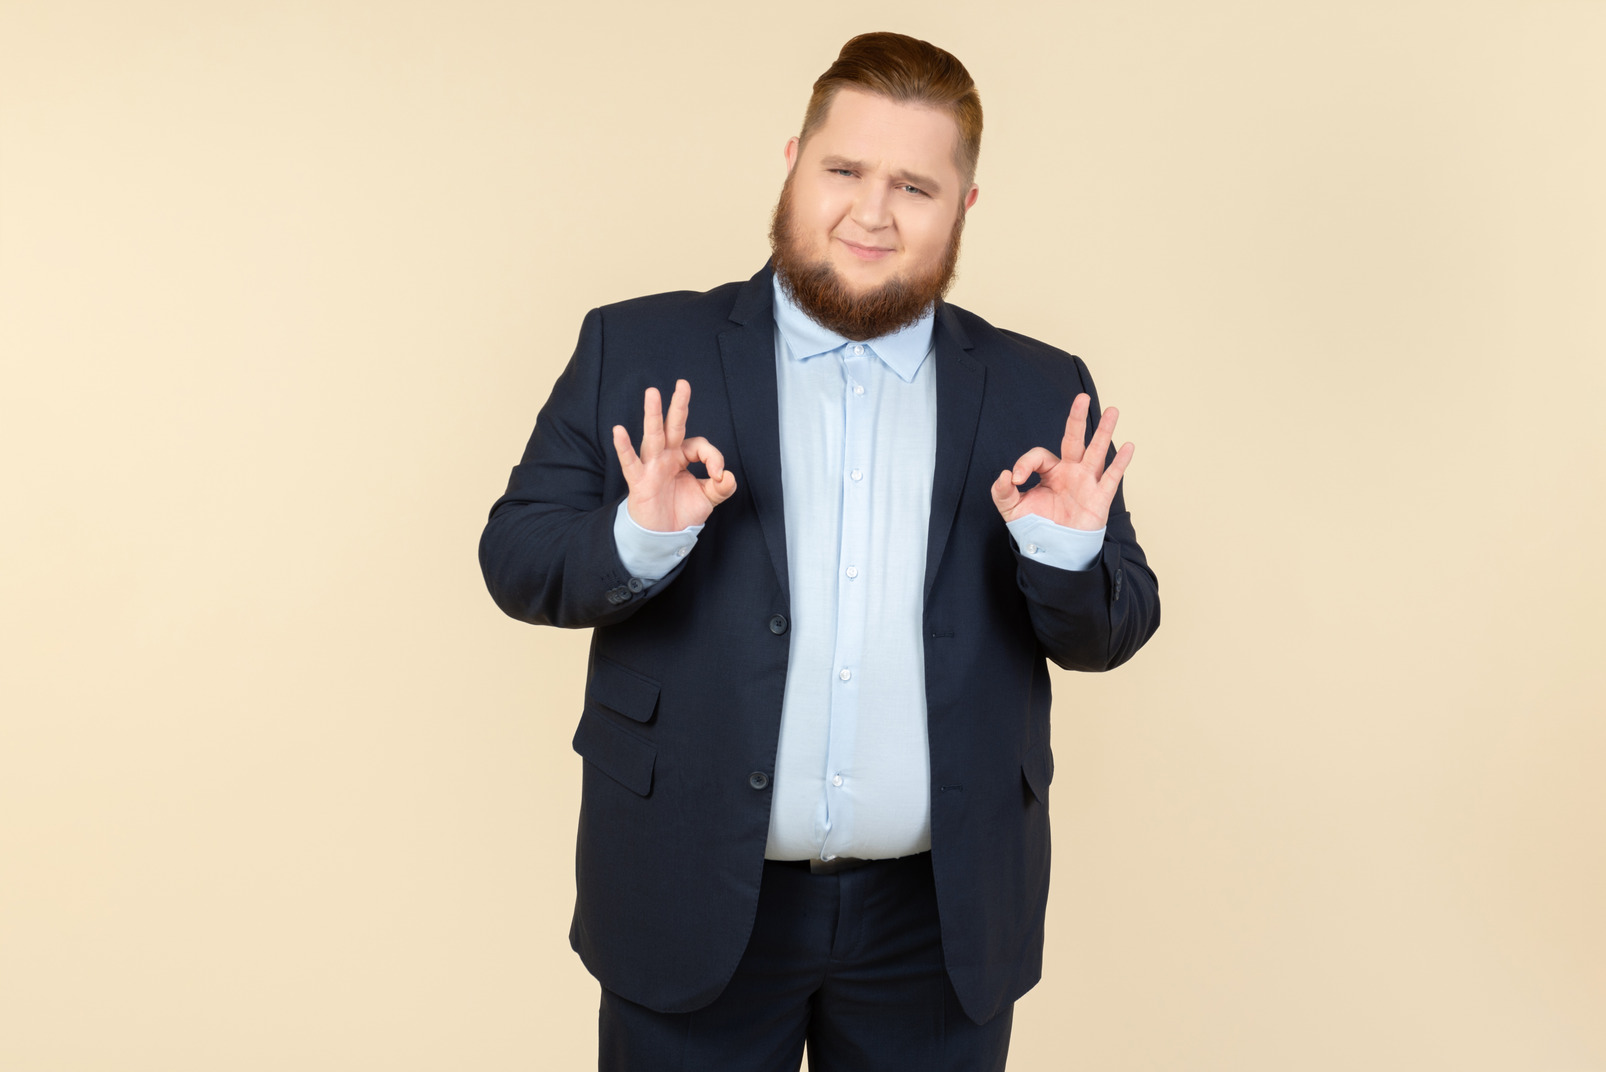 Young overweight man in suit showing ok gesture with both hands